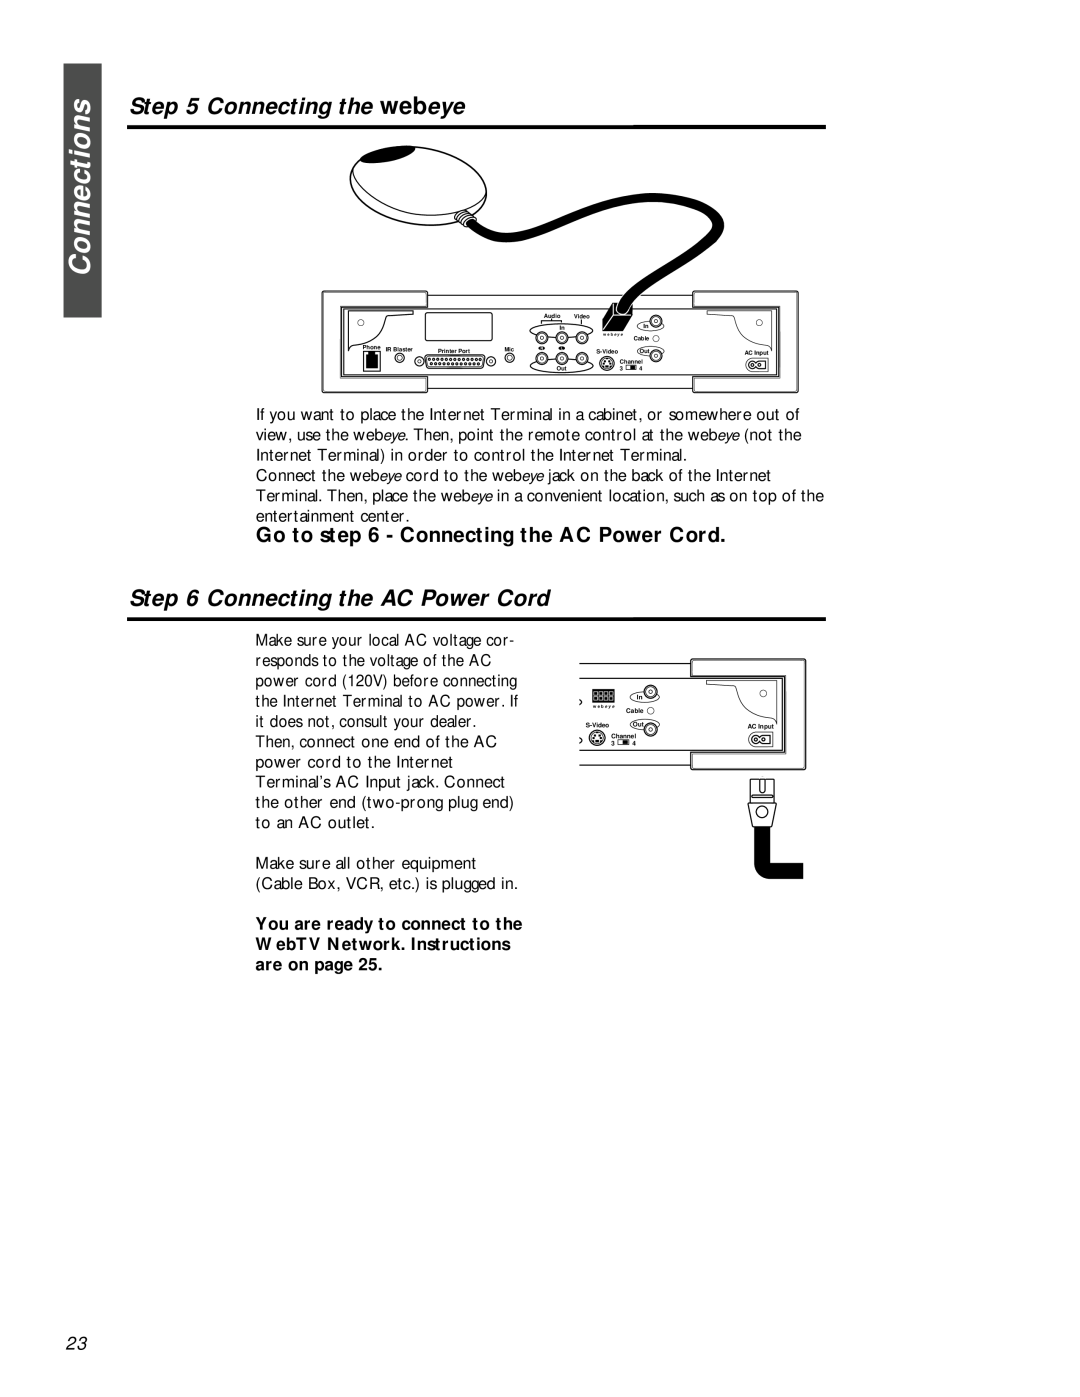 Philips MAT972KB QUG owner manual Connecting the webeye, Go to - Connecting the AC Power Cord, Connections 